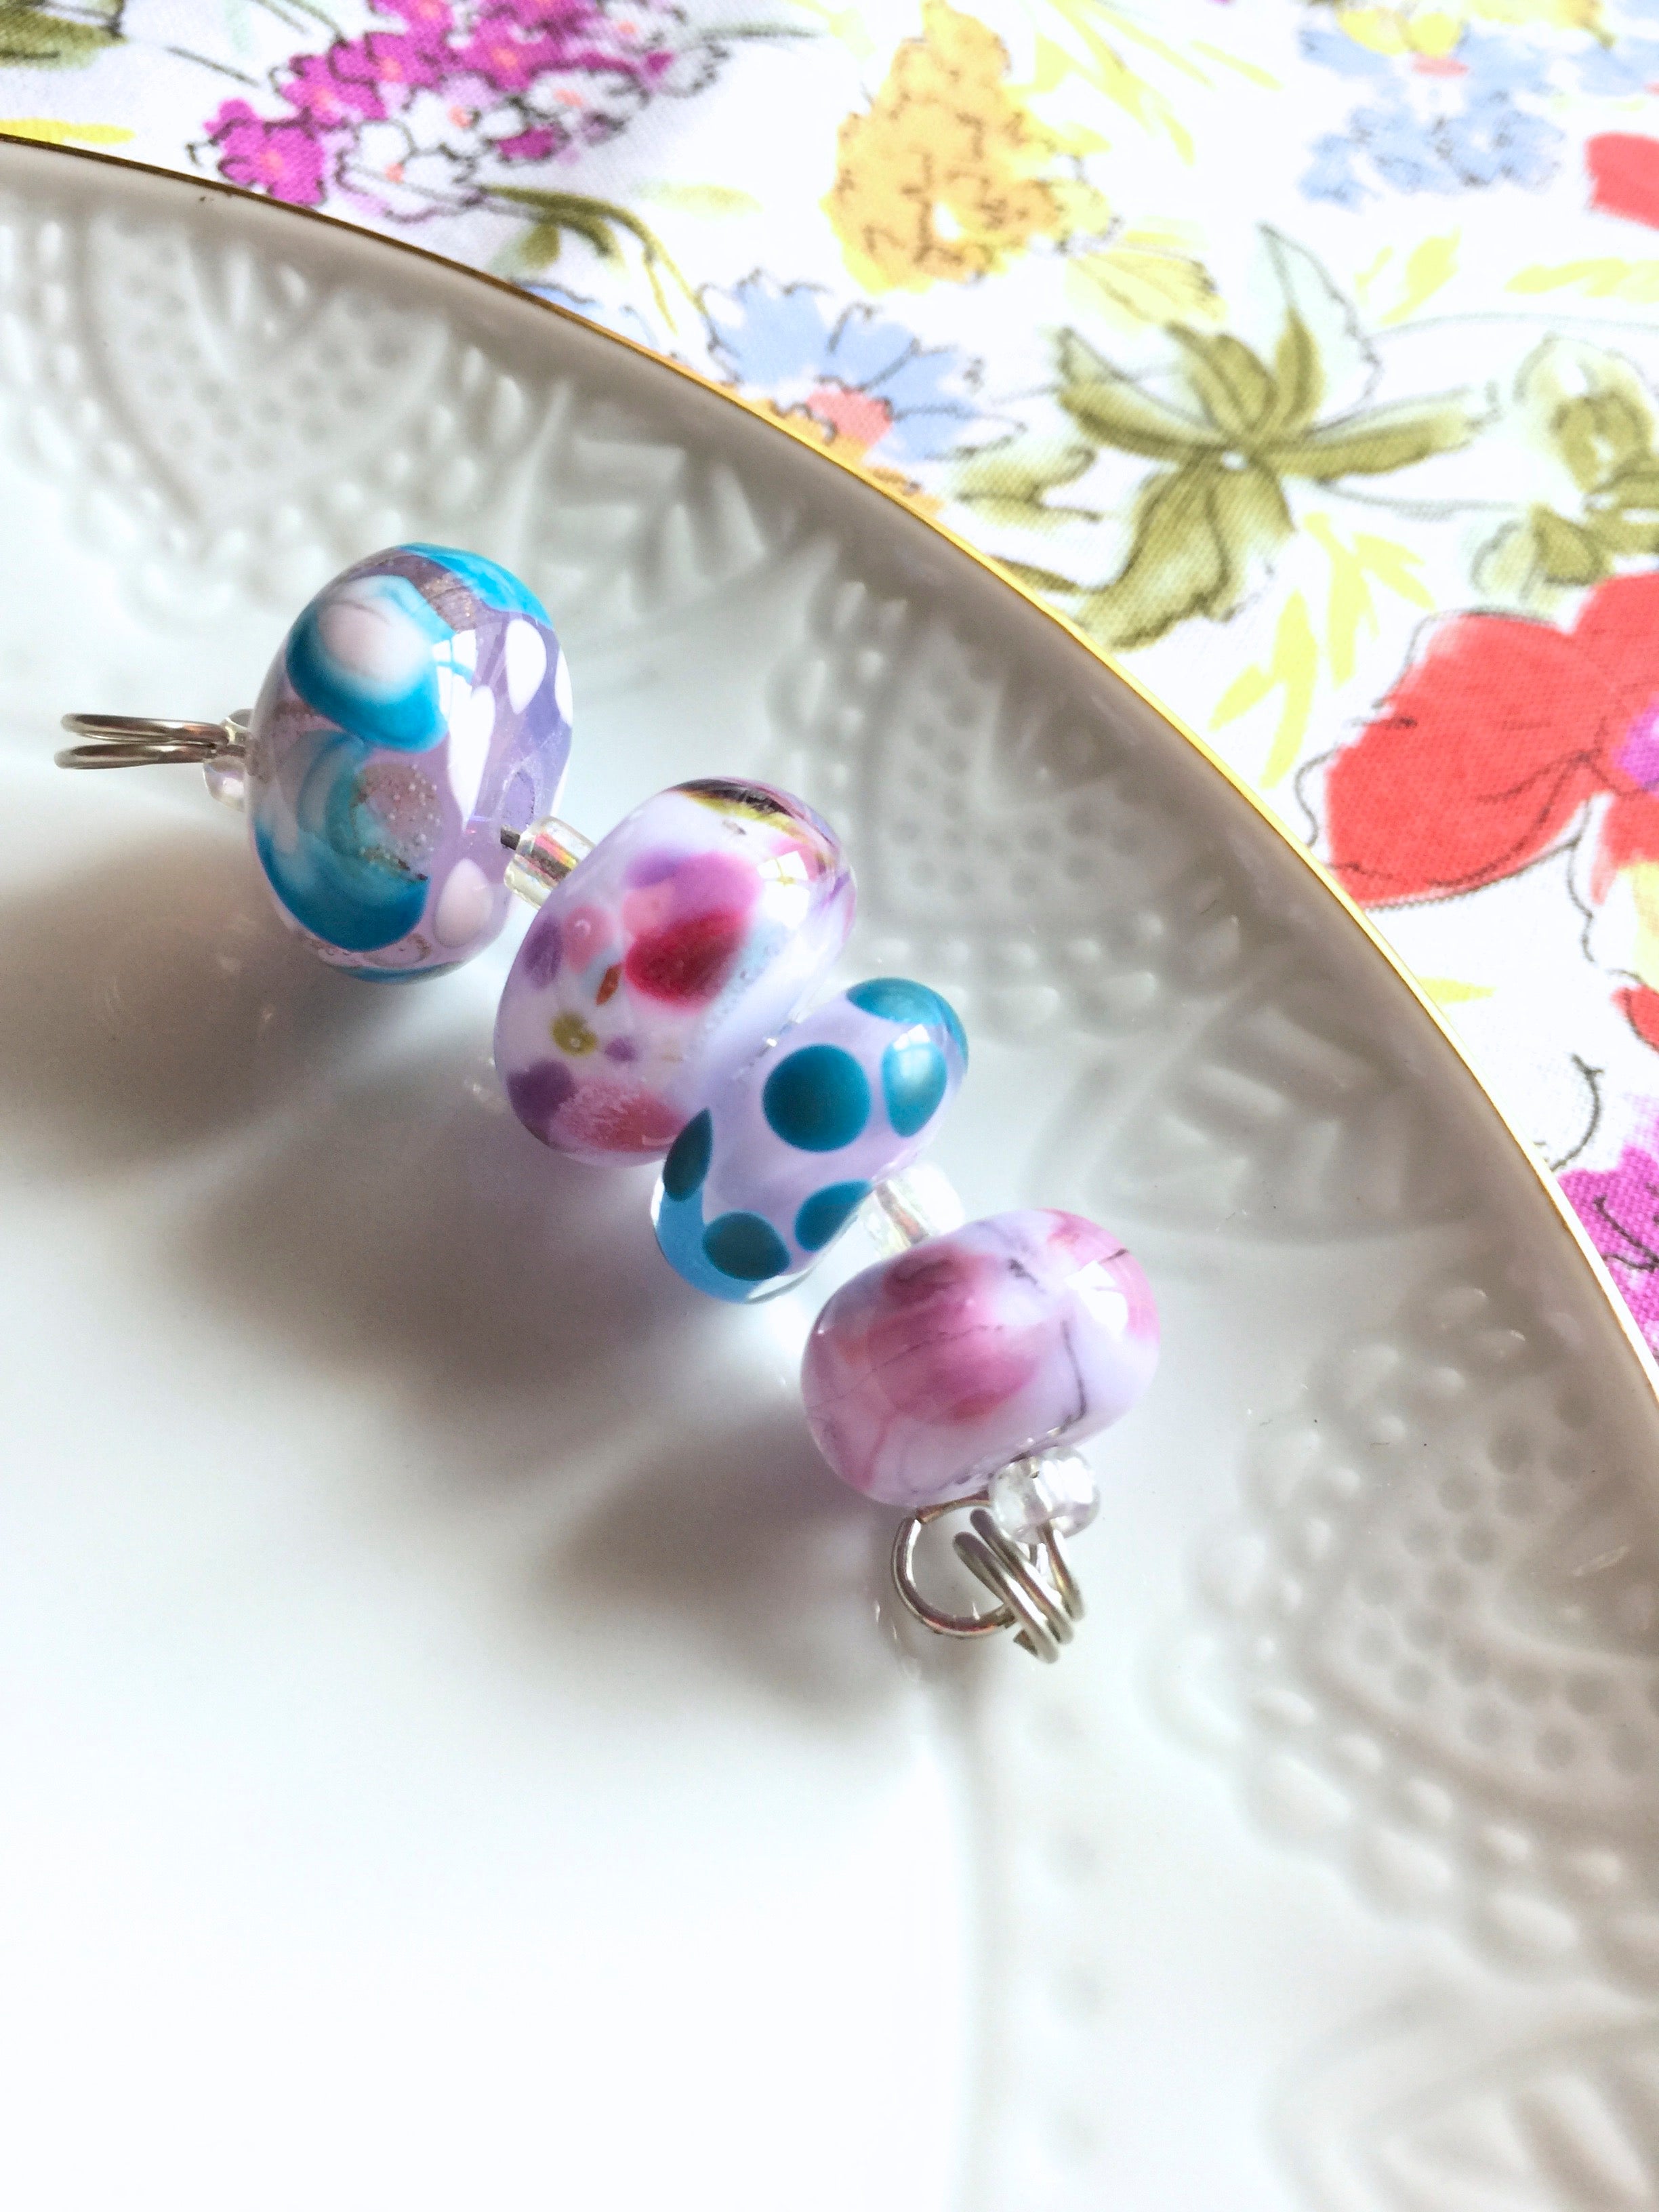 Set of 4 Handcrafted Lampwork Glass Beads in shades of Pink, Blues, Violet with spots and swirls.